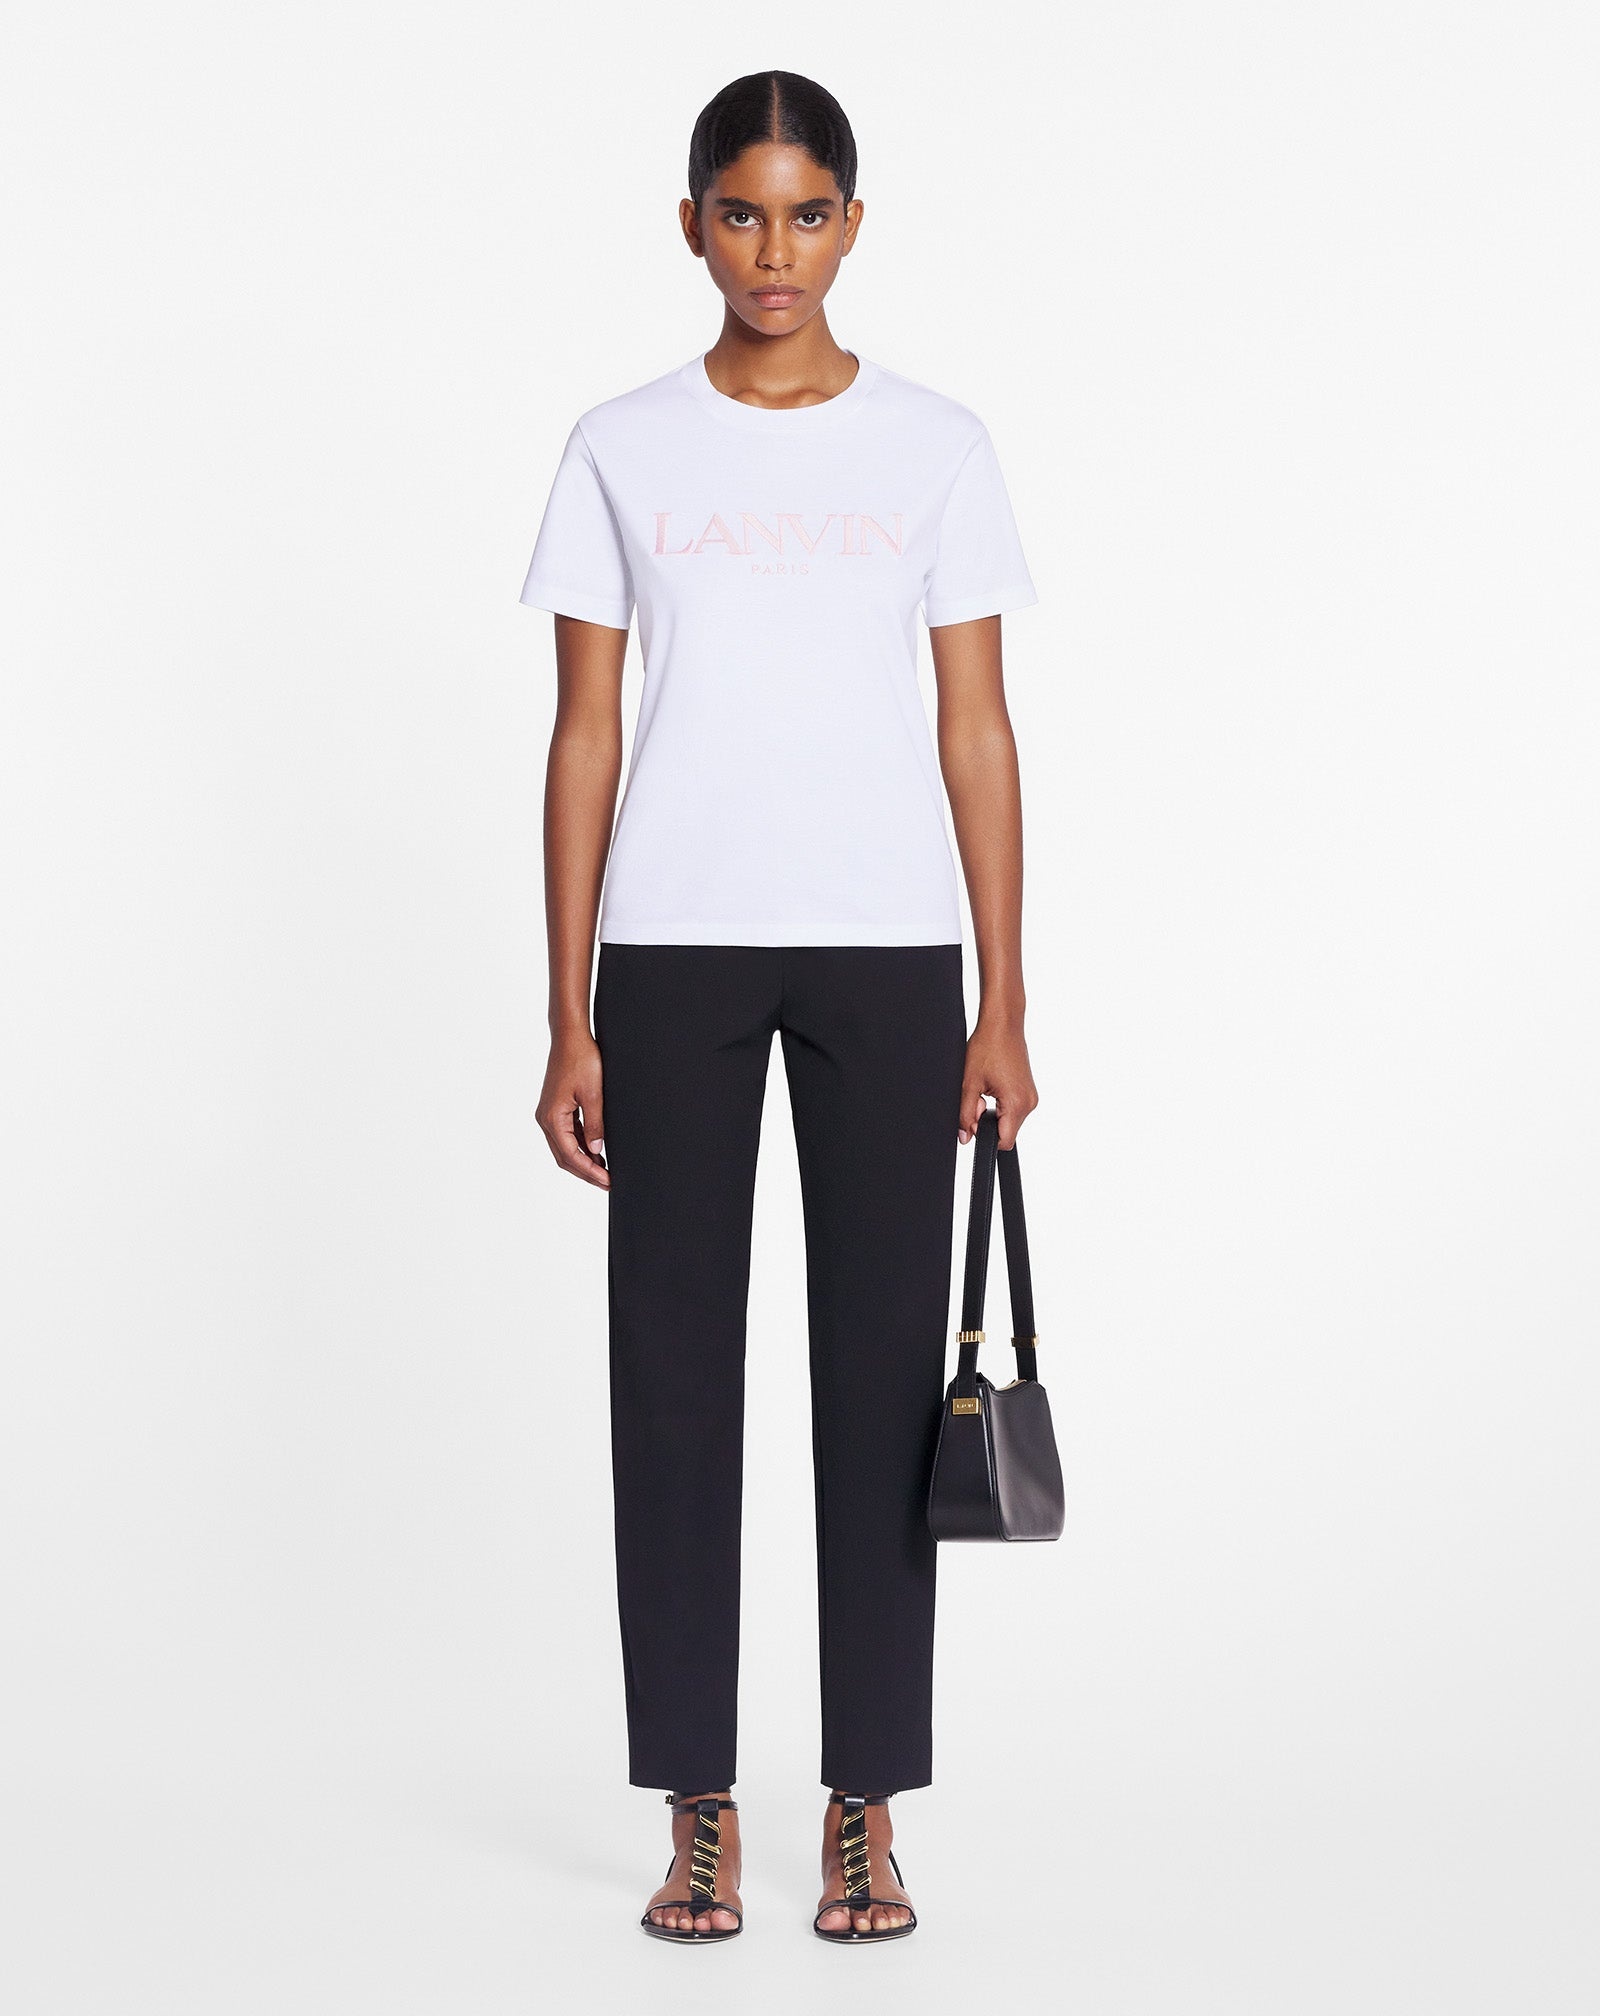 LANVIN EMBROIDERED CLASSIC T-SHIRT - 2